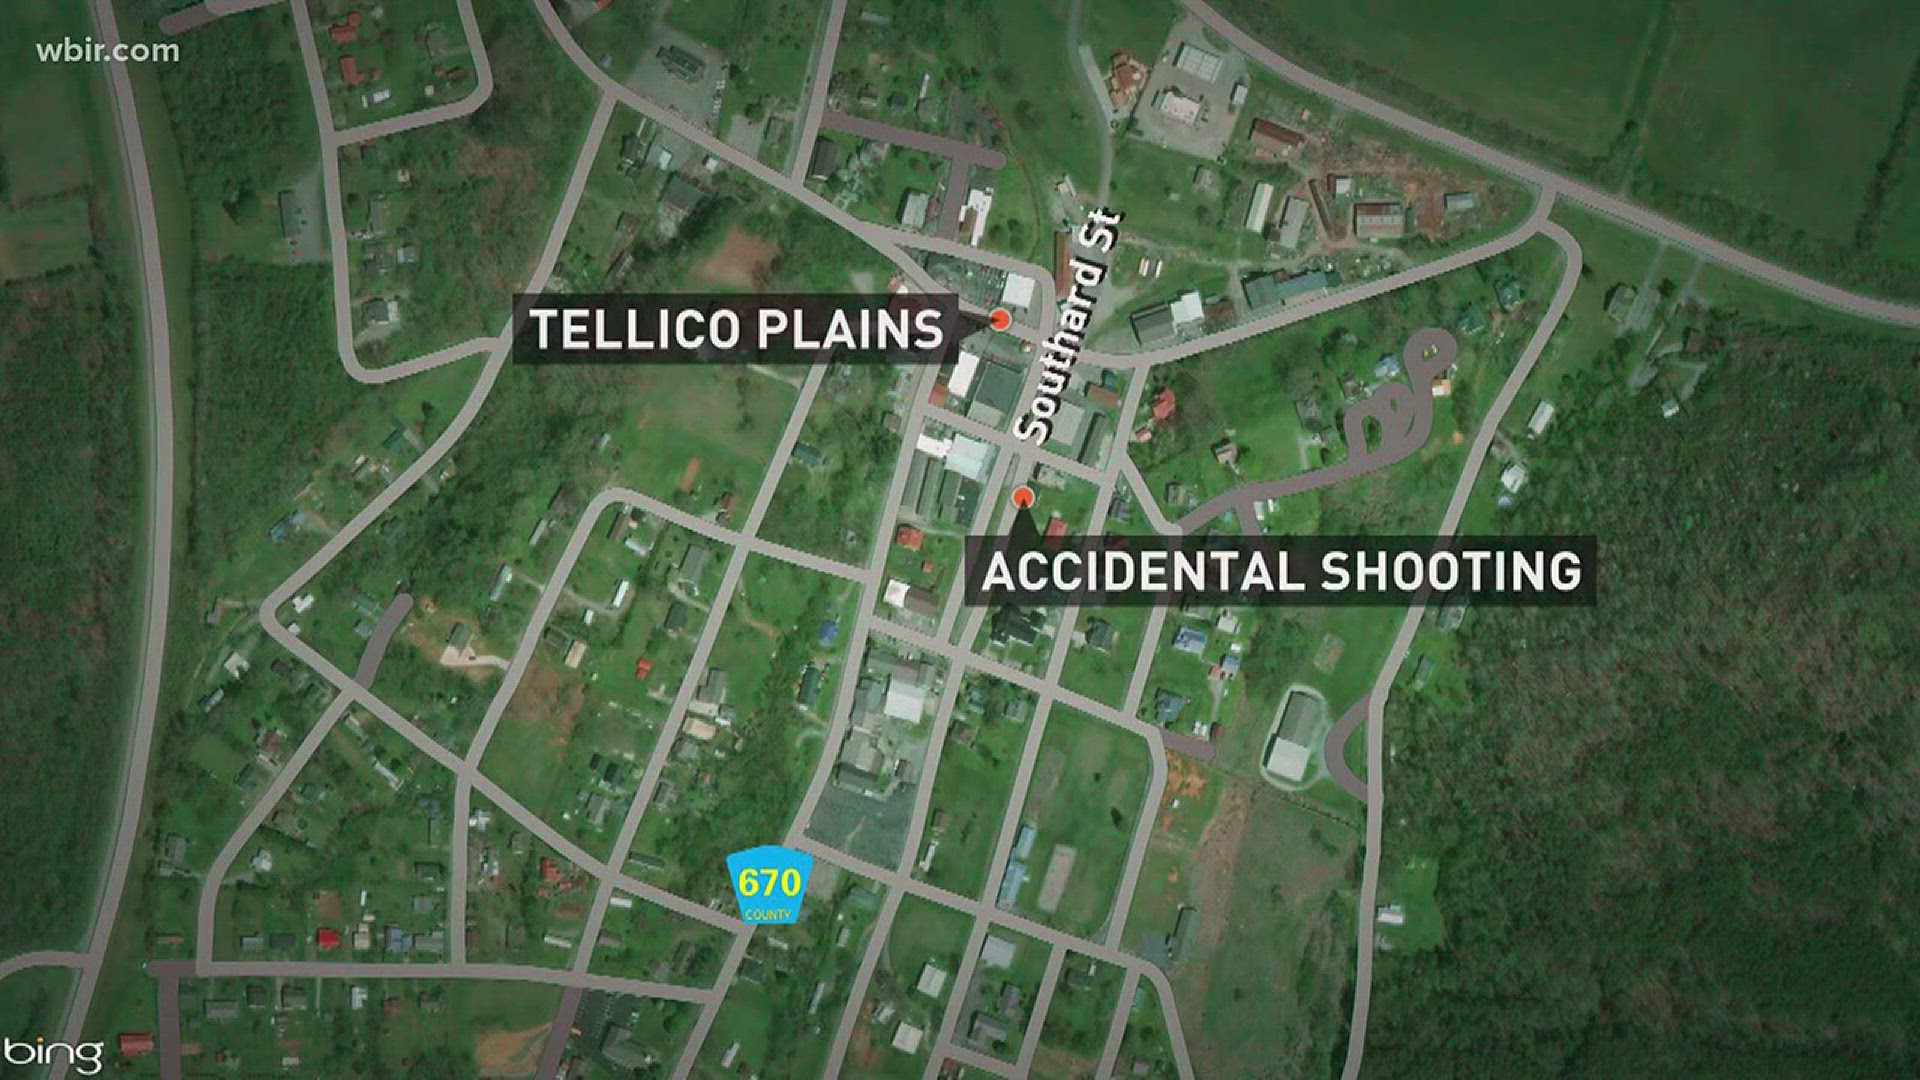 Nov. 16, 2017: Tellico Plains authorities say a man accidentally shot himself as well as his wife while showing off a pistol.